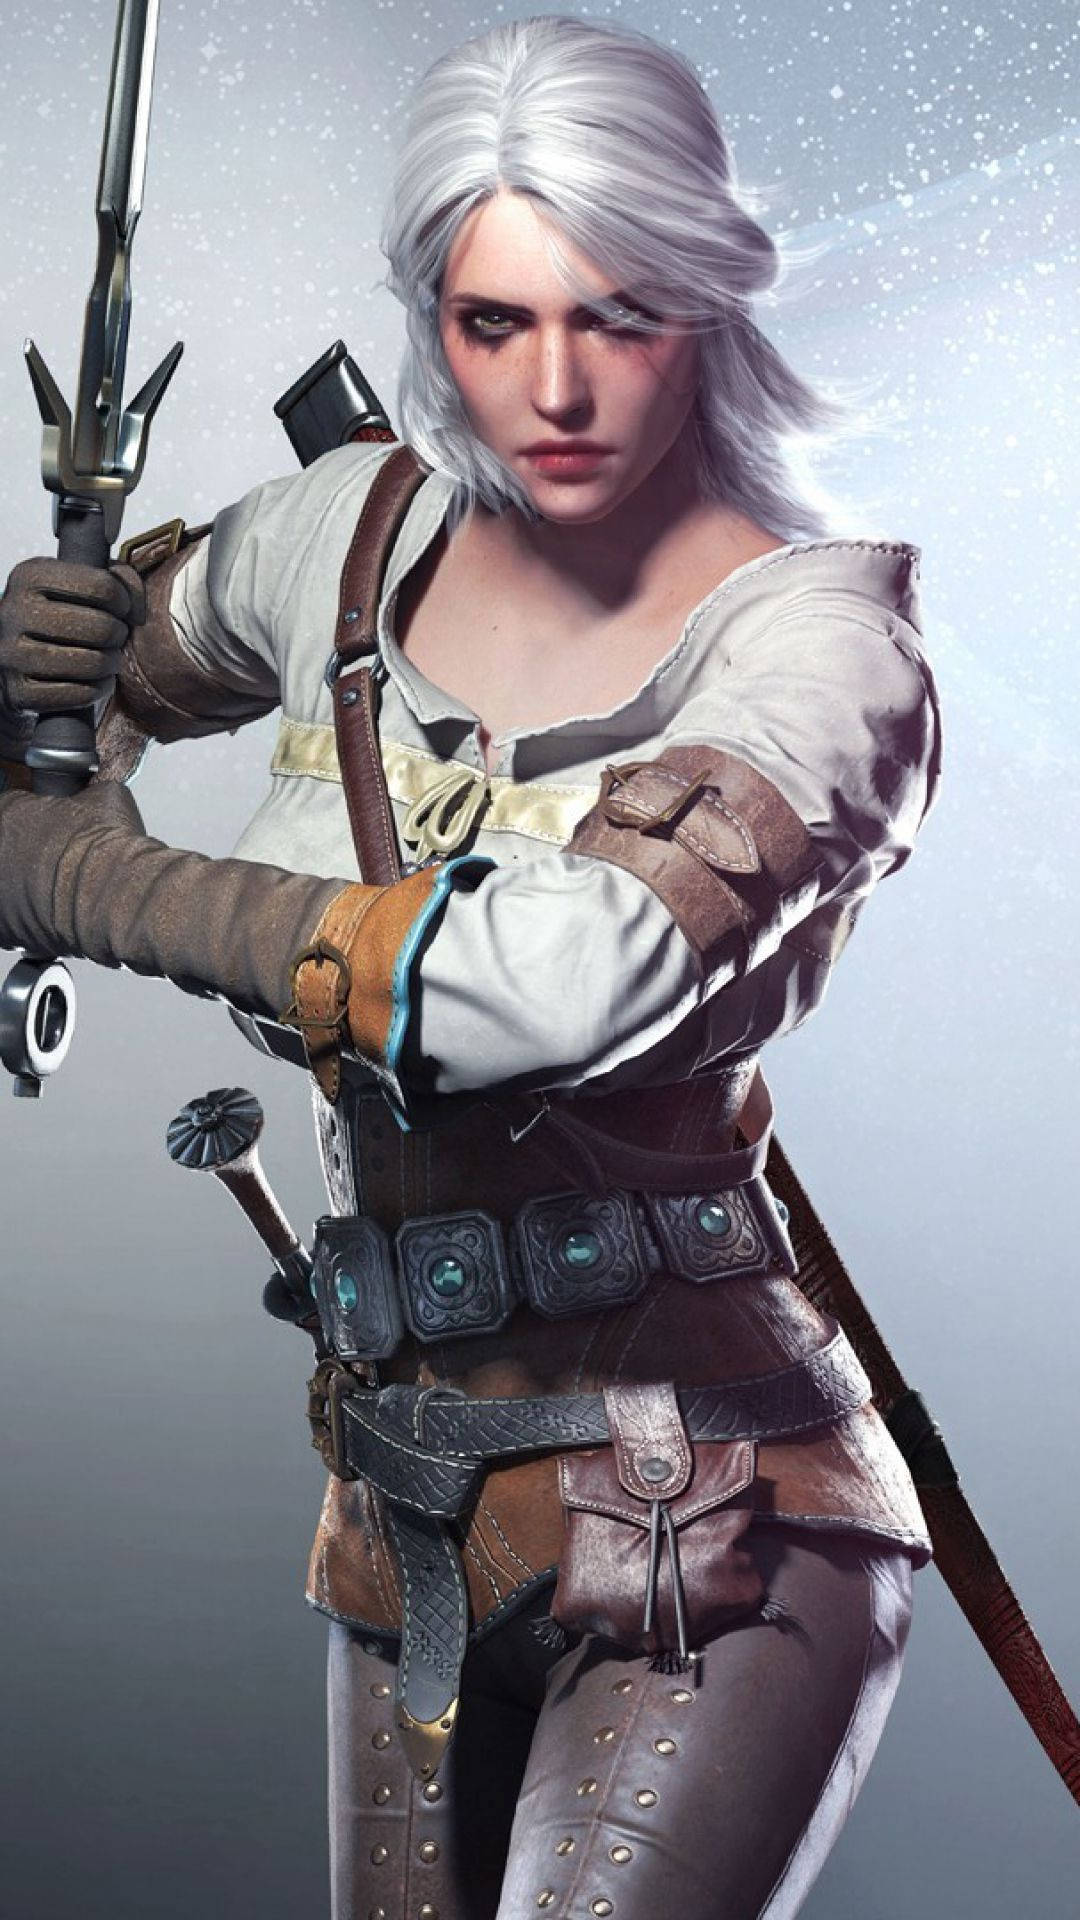 Ciriwitcher 3 Android: Ciri Från Witcher 3 På Android. Wallpaper